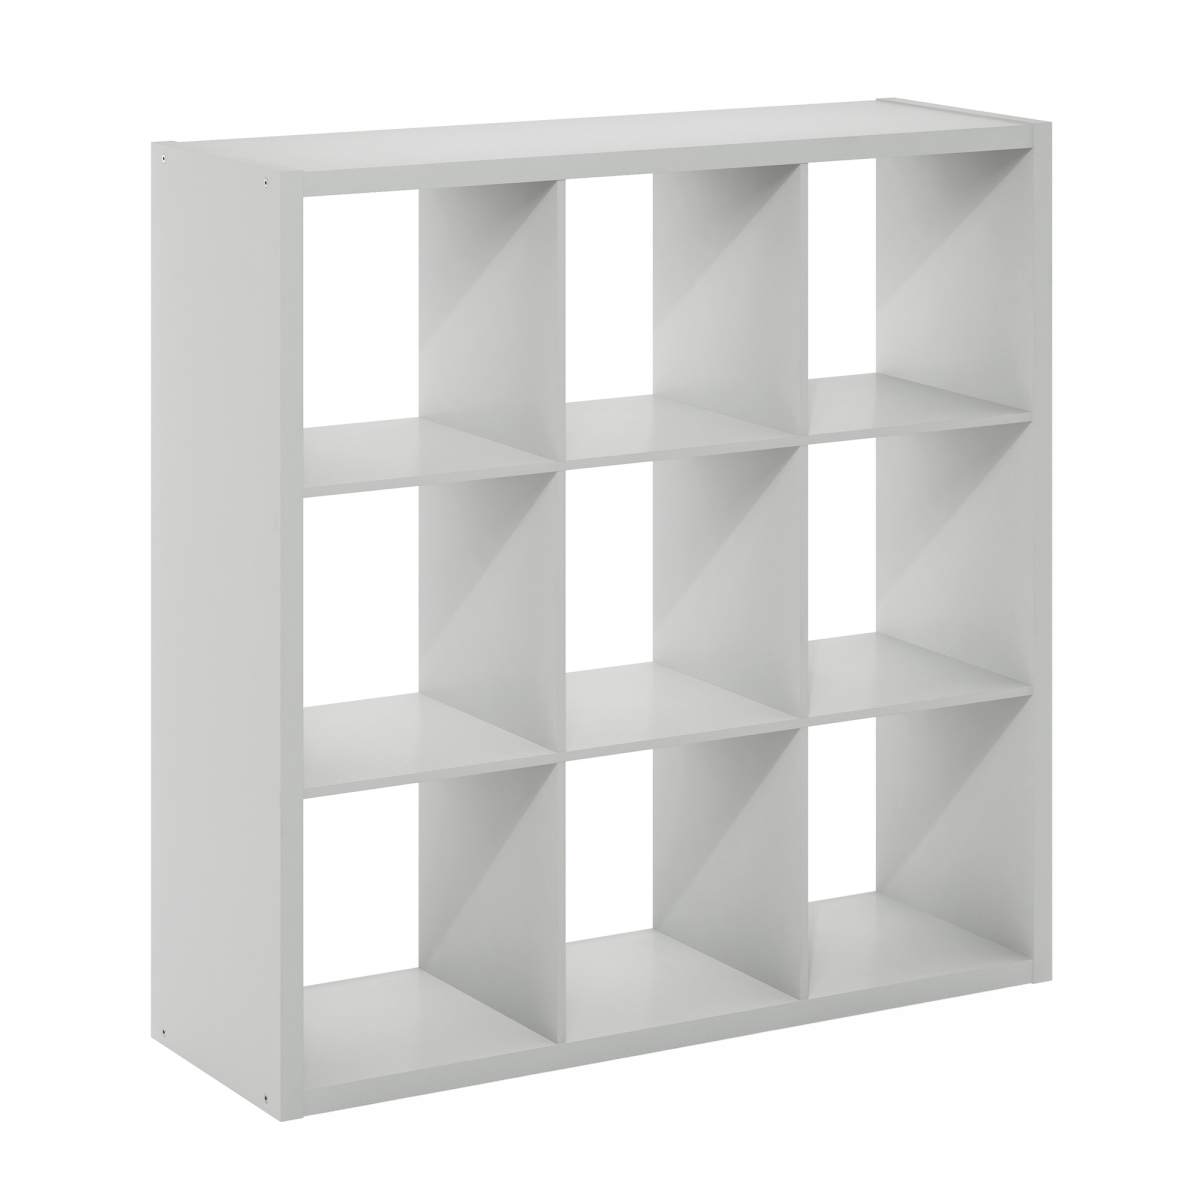 Picture of Furinno LU22007LG Cubicle Open Back Decorative Cube Storage Organizer - 9-Cube, Light Grey